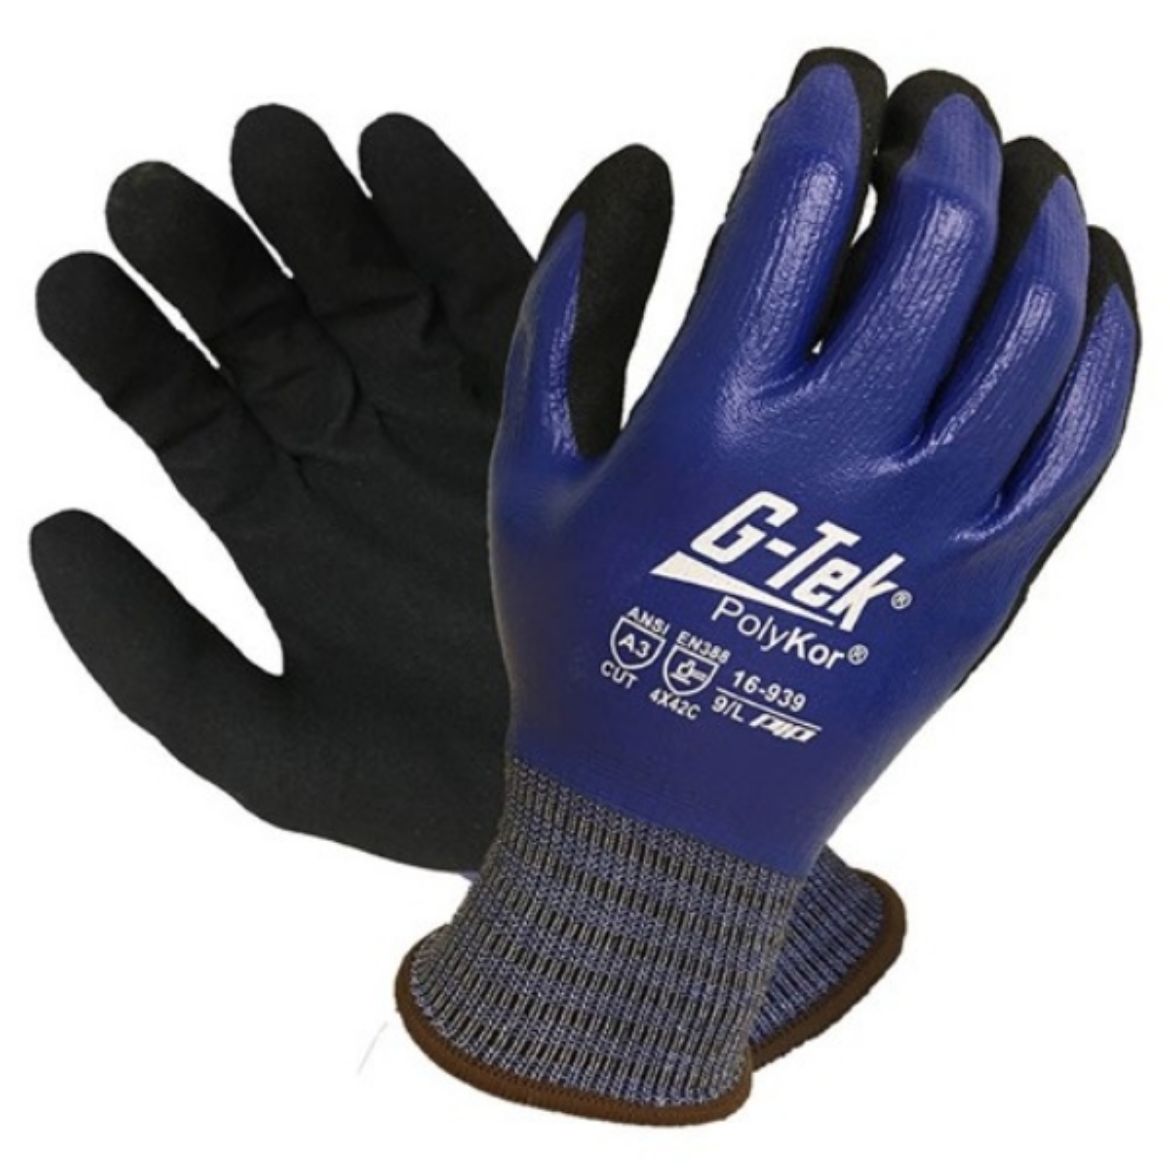 Picture of G-TEK POLYKOR X7 DUAL COAT CUT C GLOVES. AVAILABLE IN SIZES 7 TO 11.